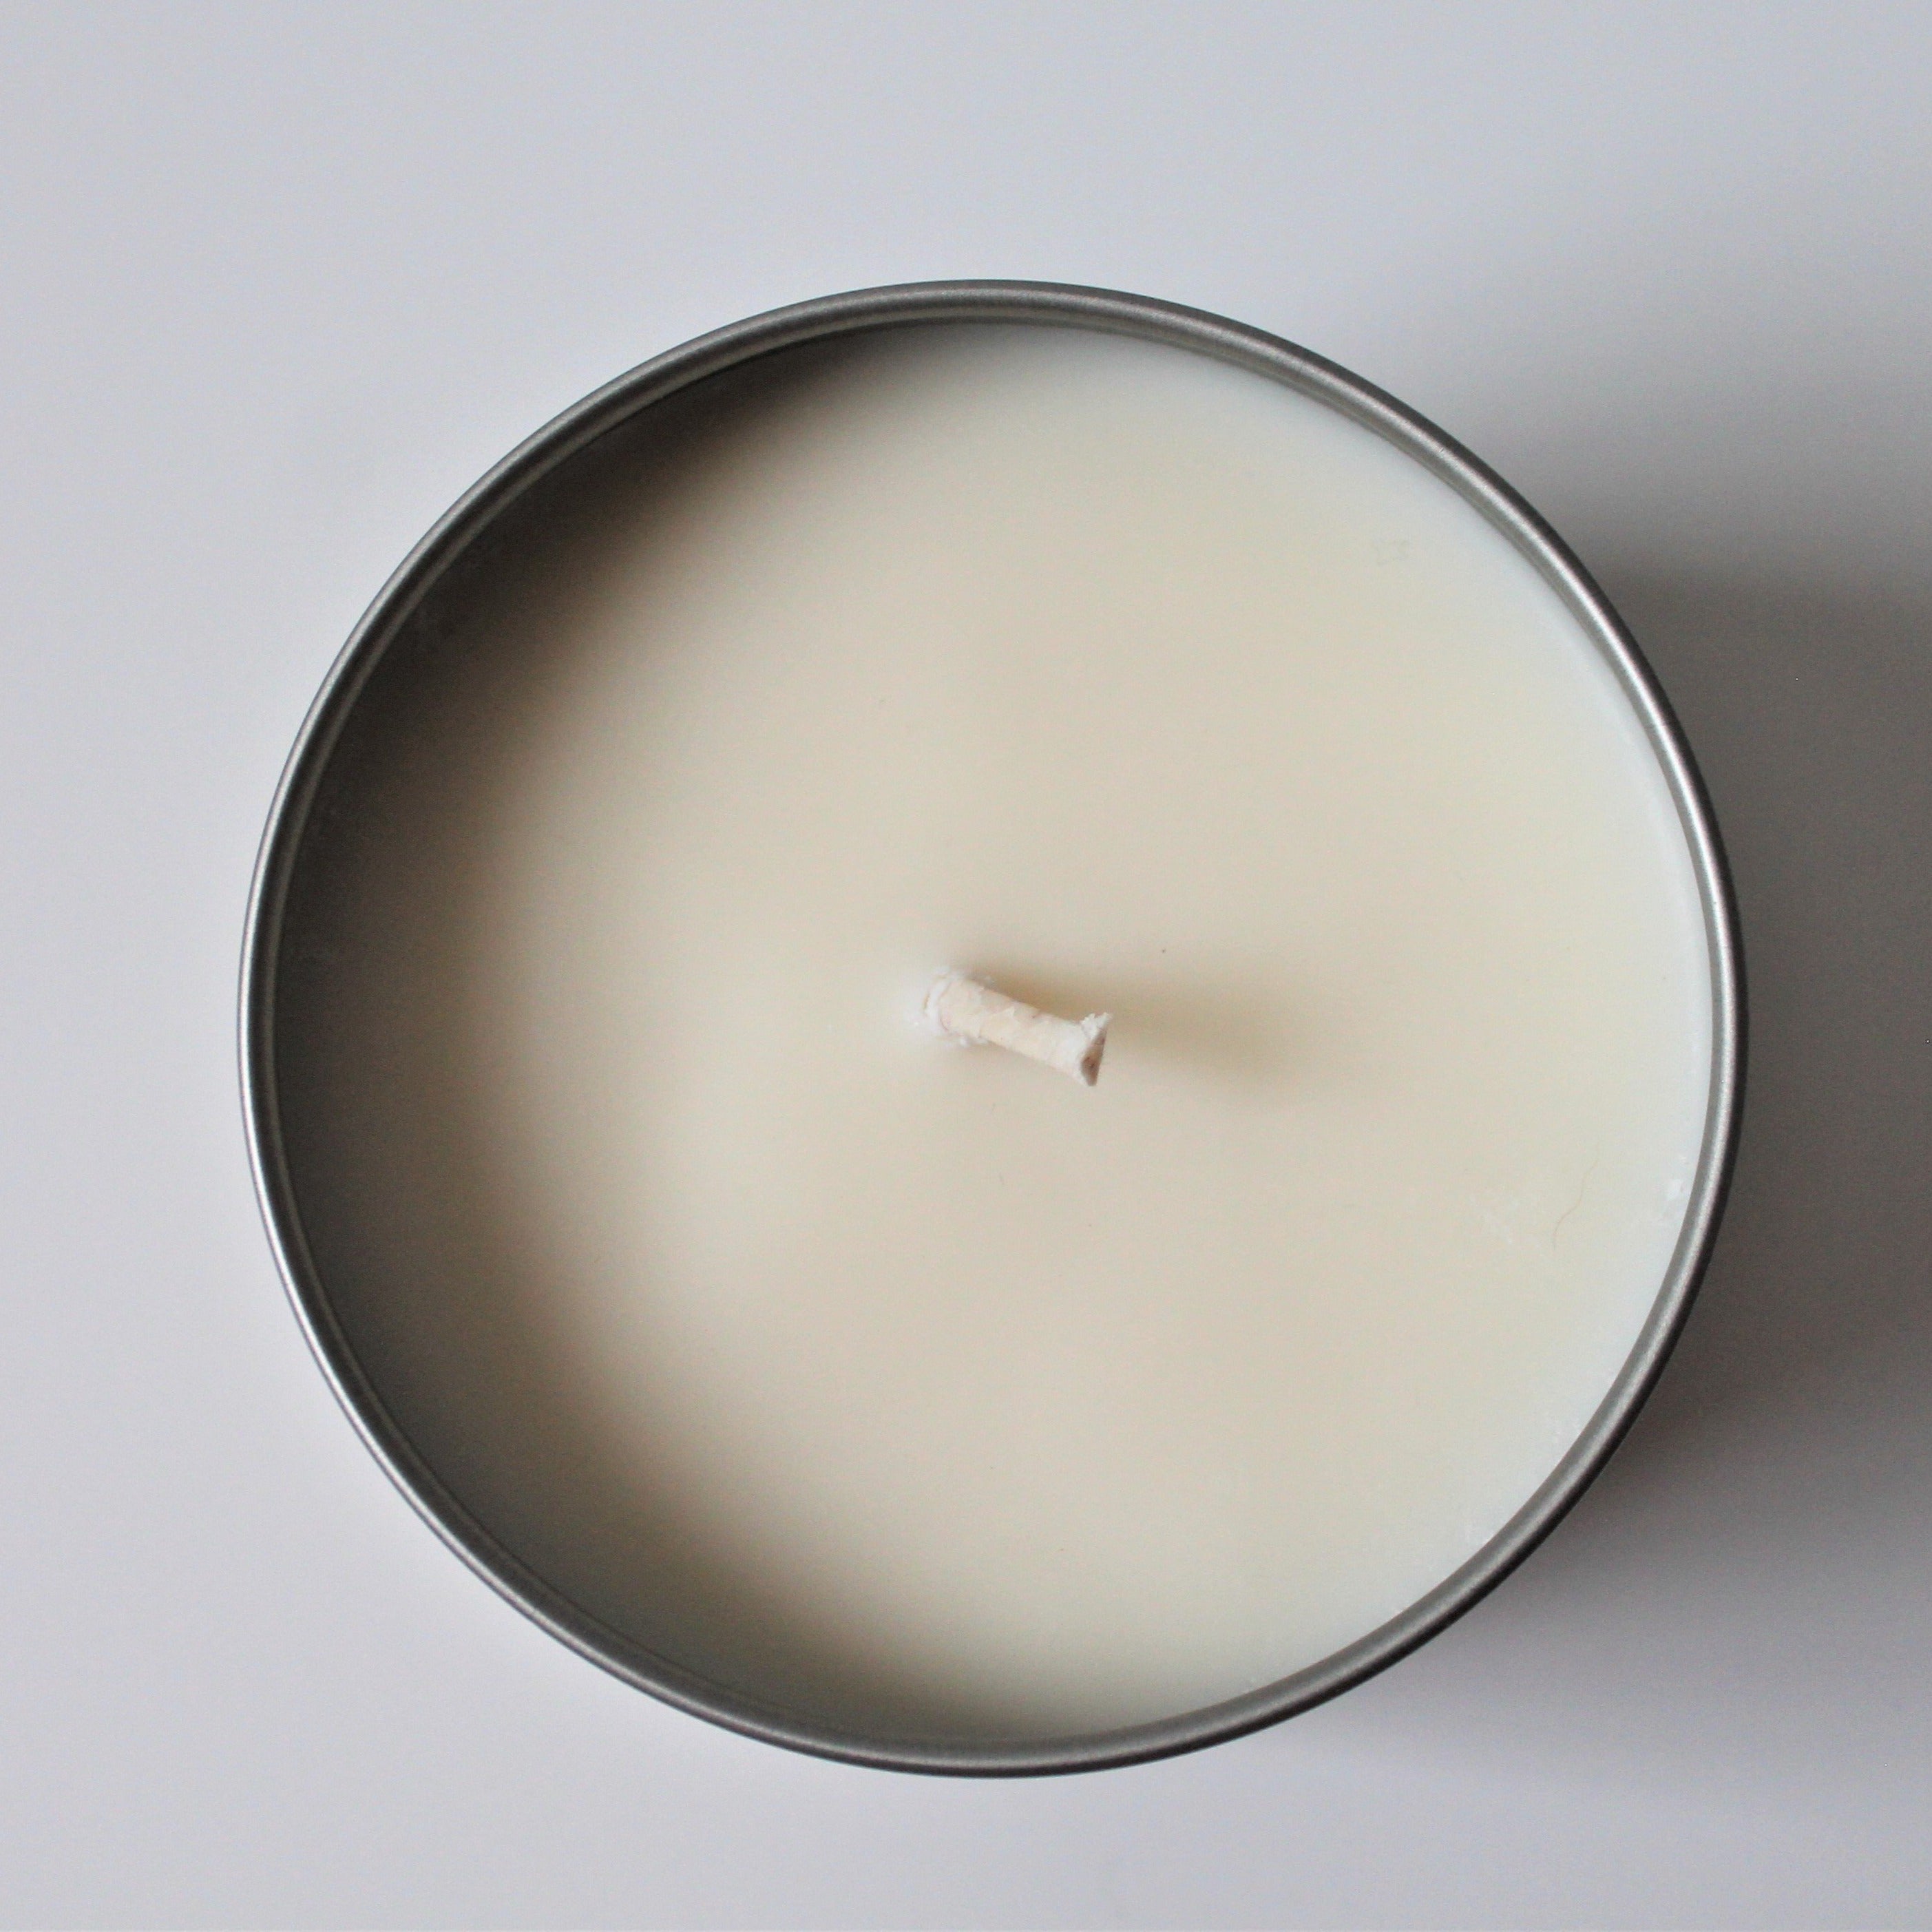 Uncharted Soy Candle, 16 oz soy candle